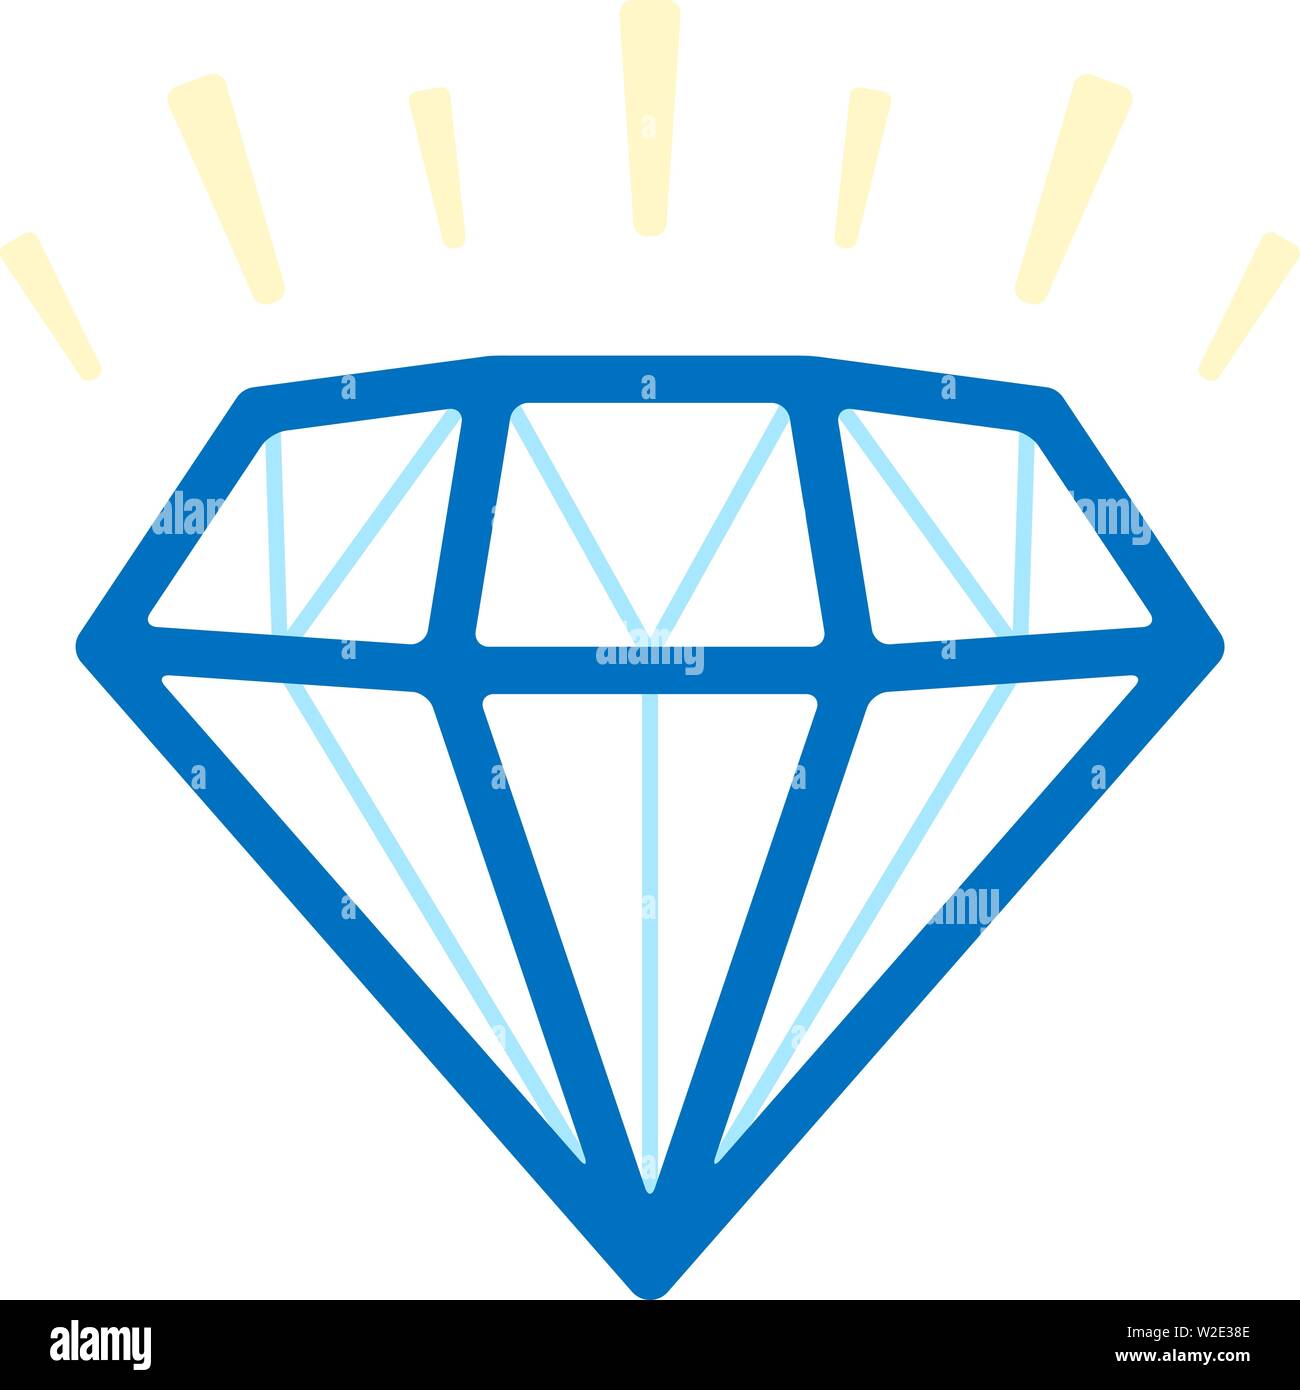 Vector illustration. Simple diamond gem icon in blue tones. Flat and clean. Stock Vector